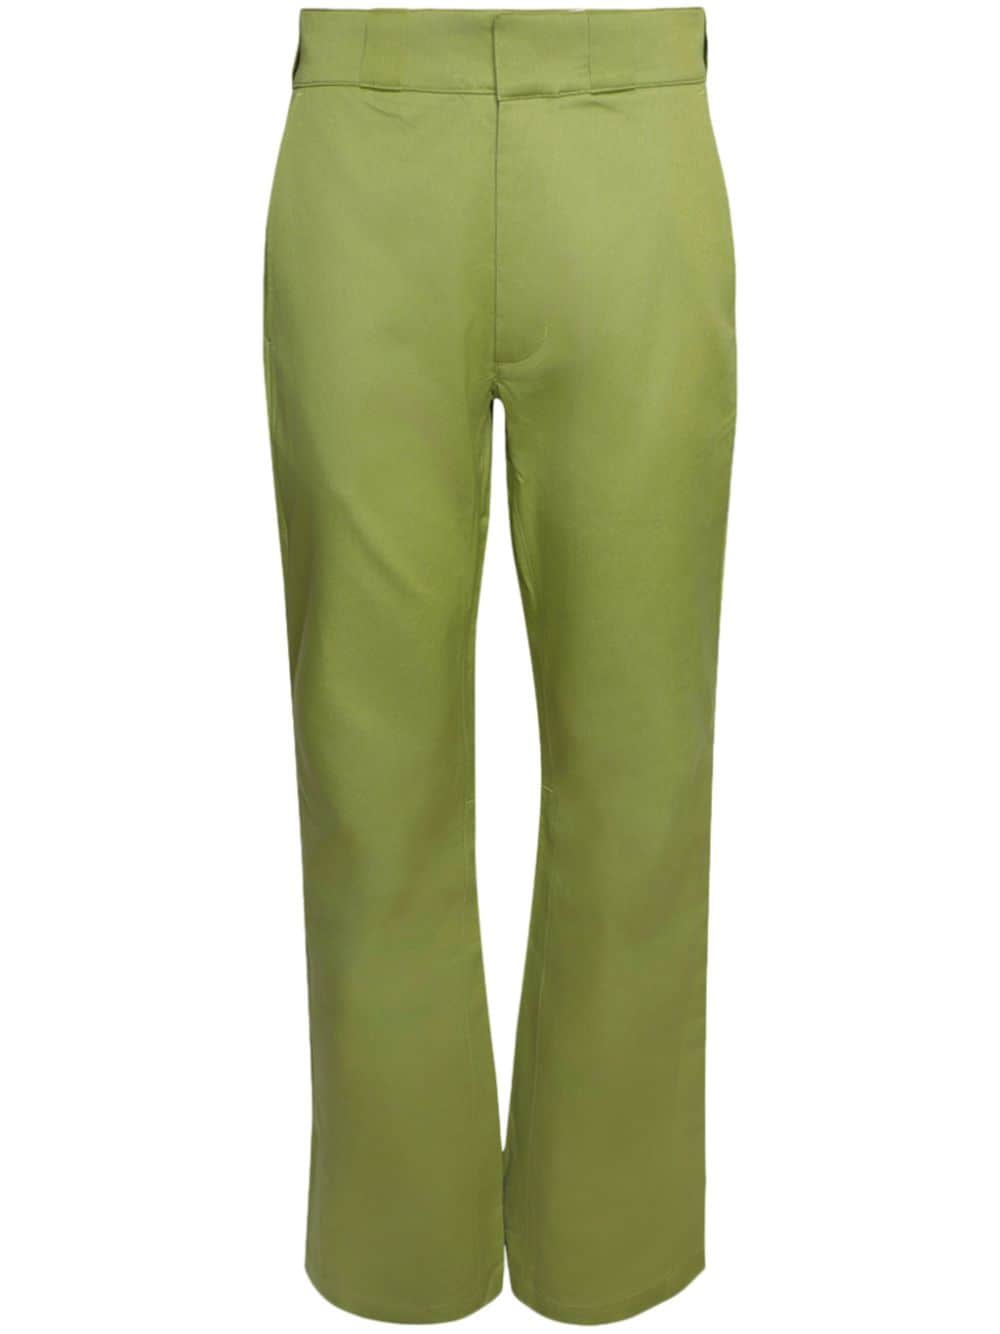 GALLERY DEPT. La Chino Flares trousers - Grün